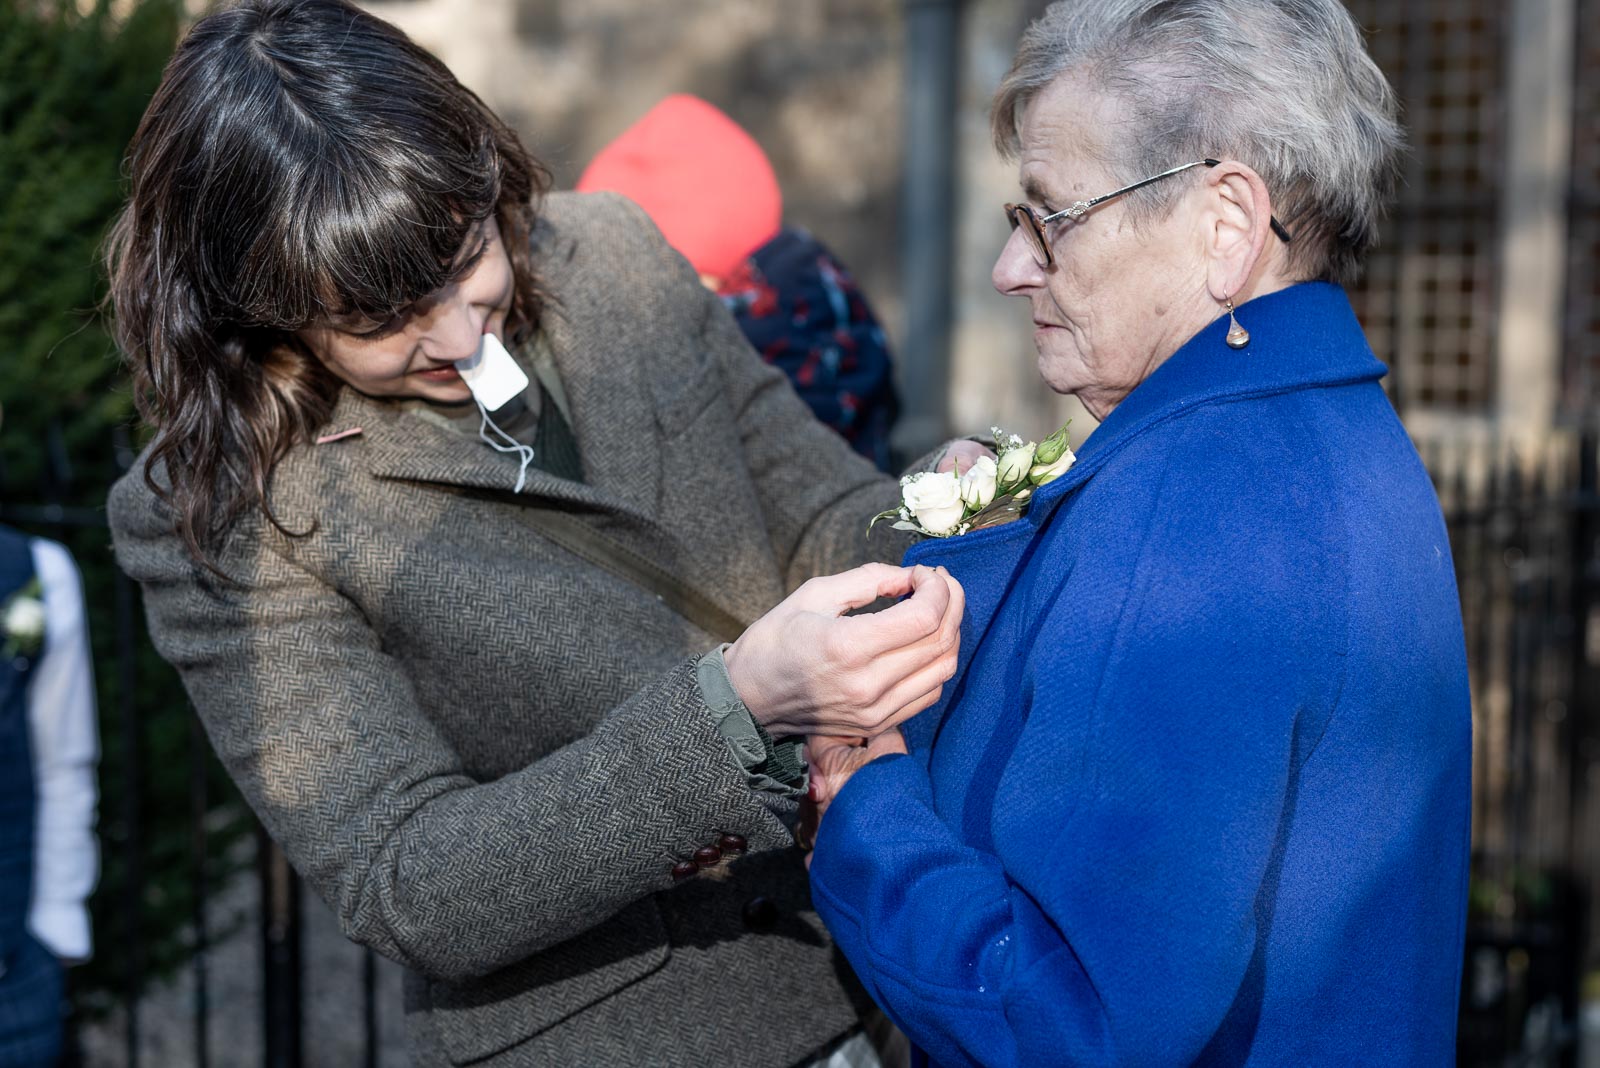 A wedding pin is put on Caron's mum before her wedding to Andy at Lewes Registry Office.